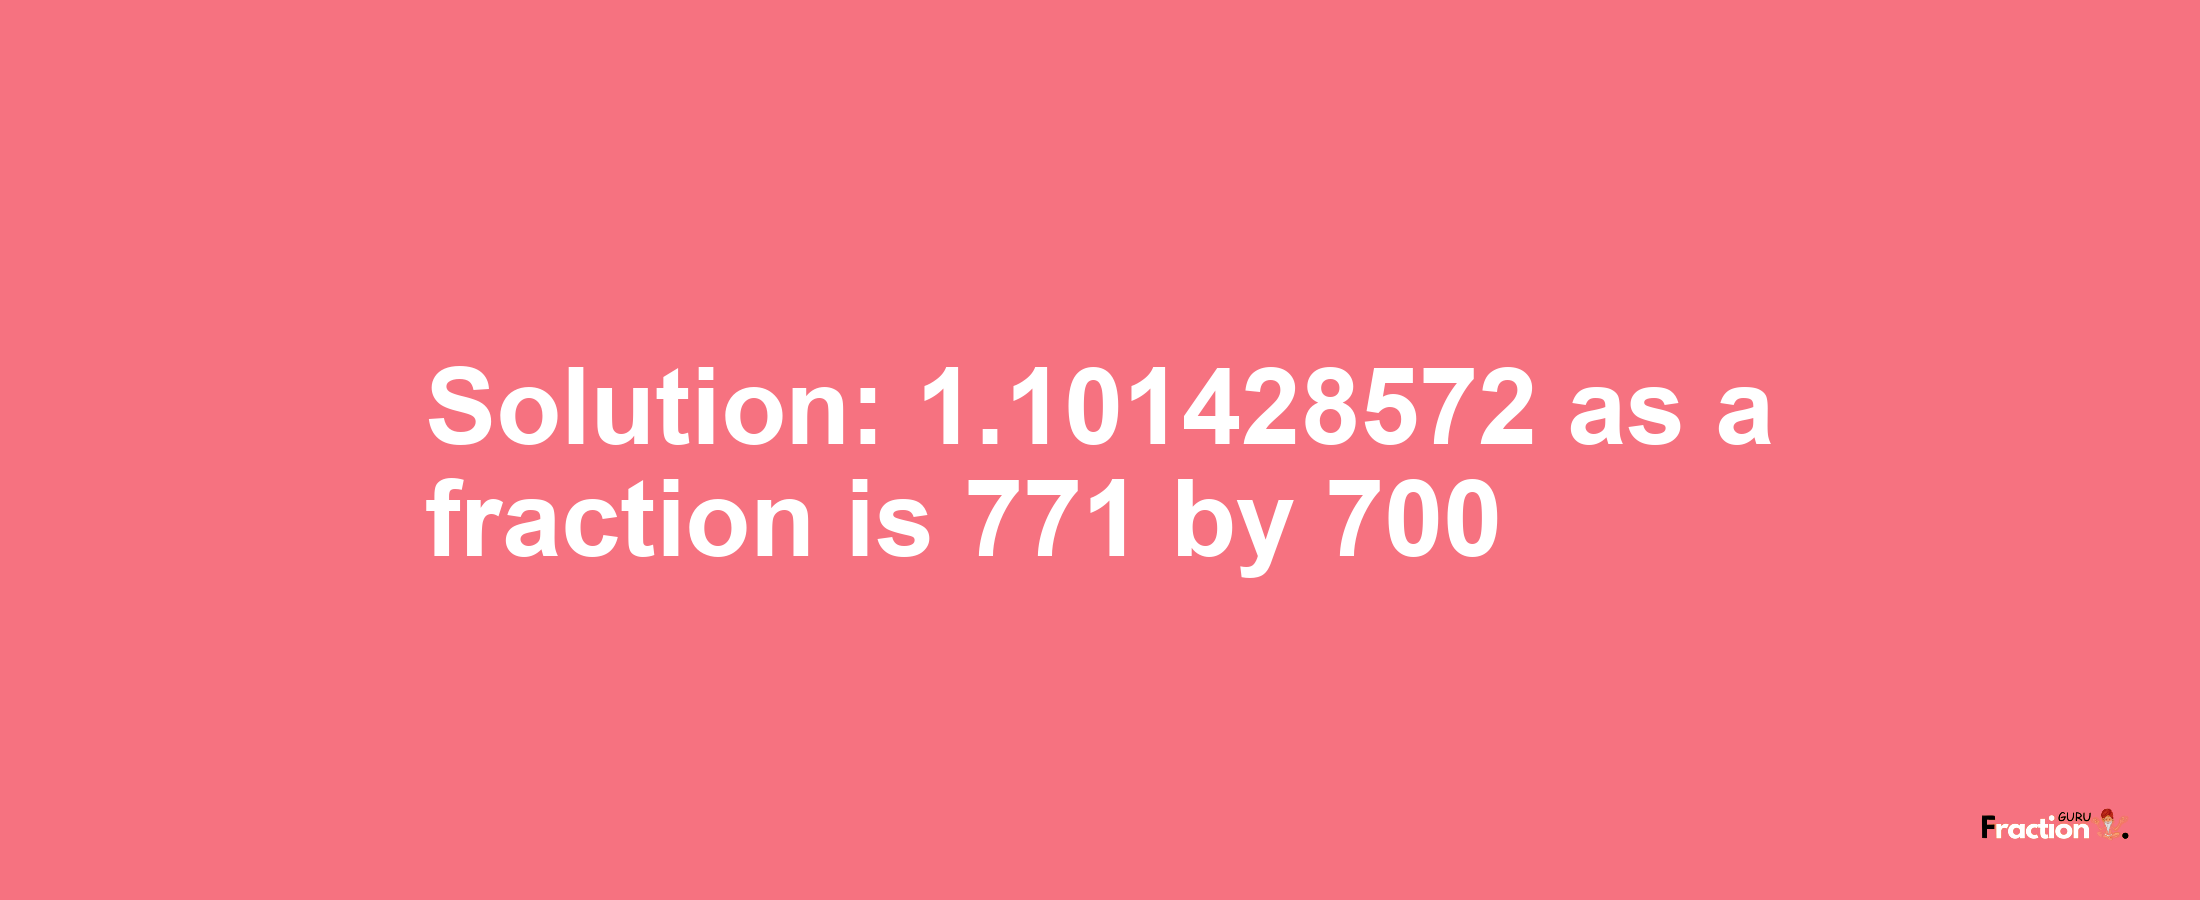 Solution:1.101428572 as a fraction is 771/700